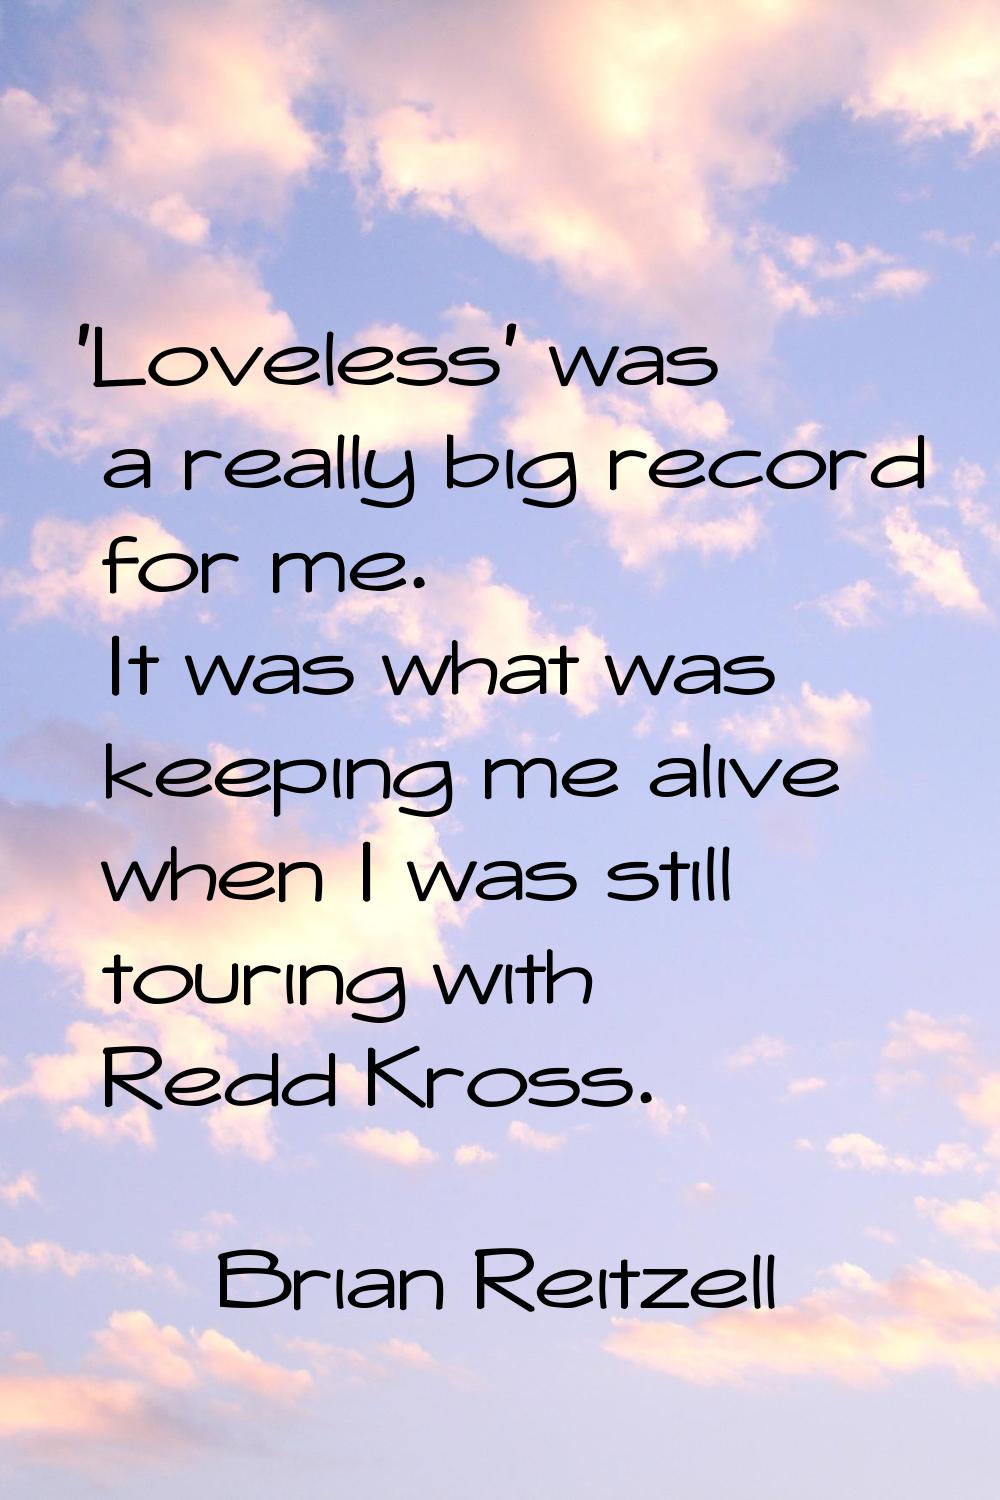 'Loveless' was a really big record for me. It was what was keeping me alive when I was still tourin